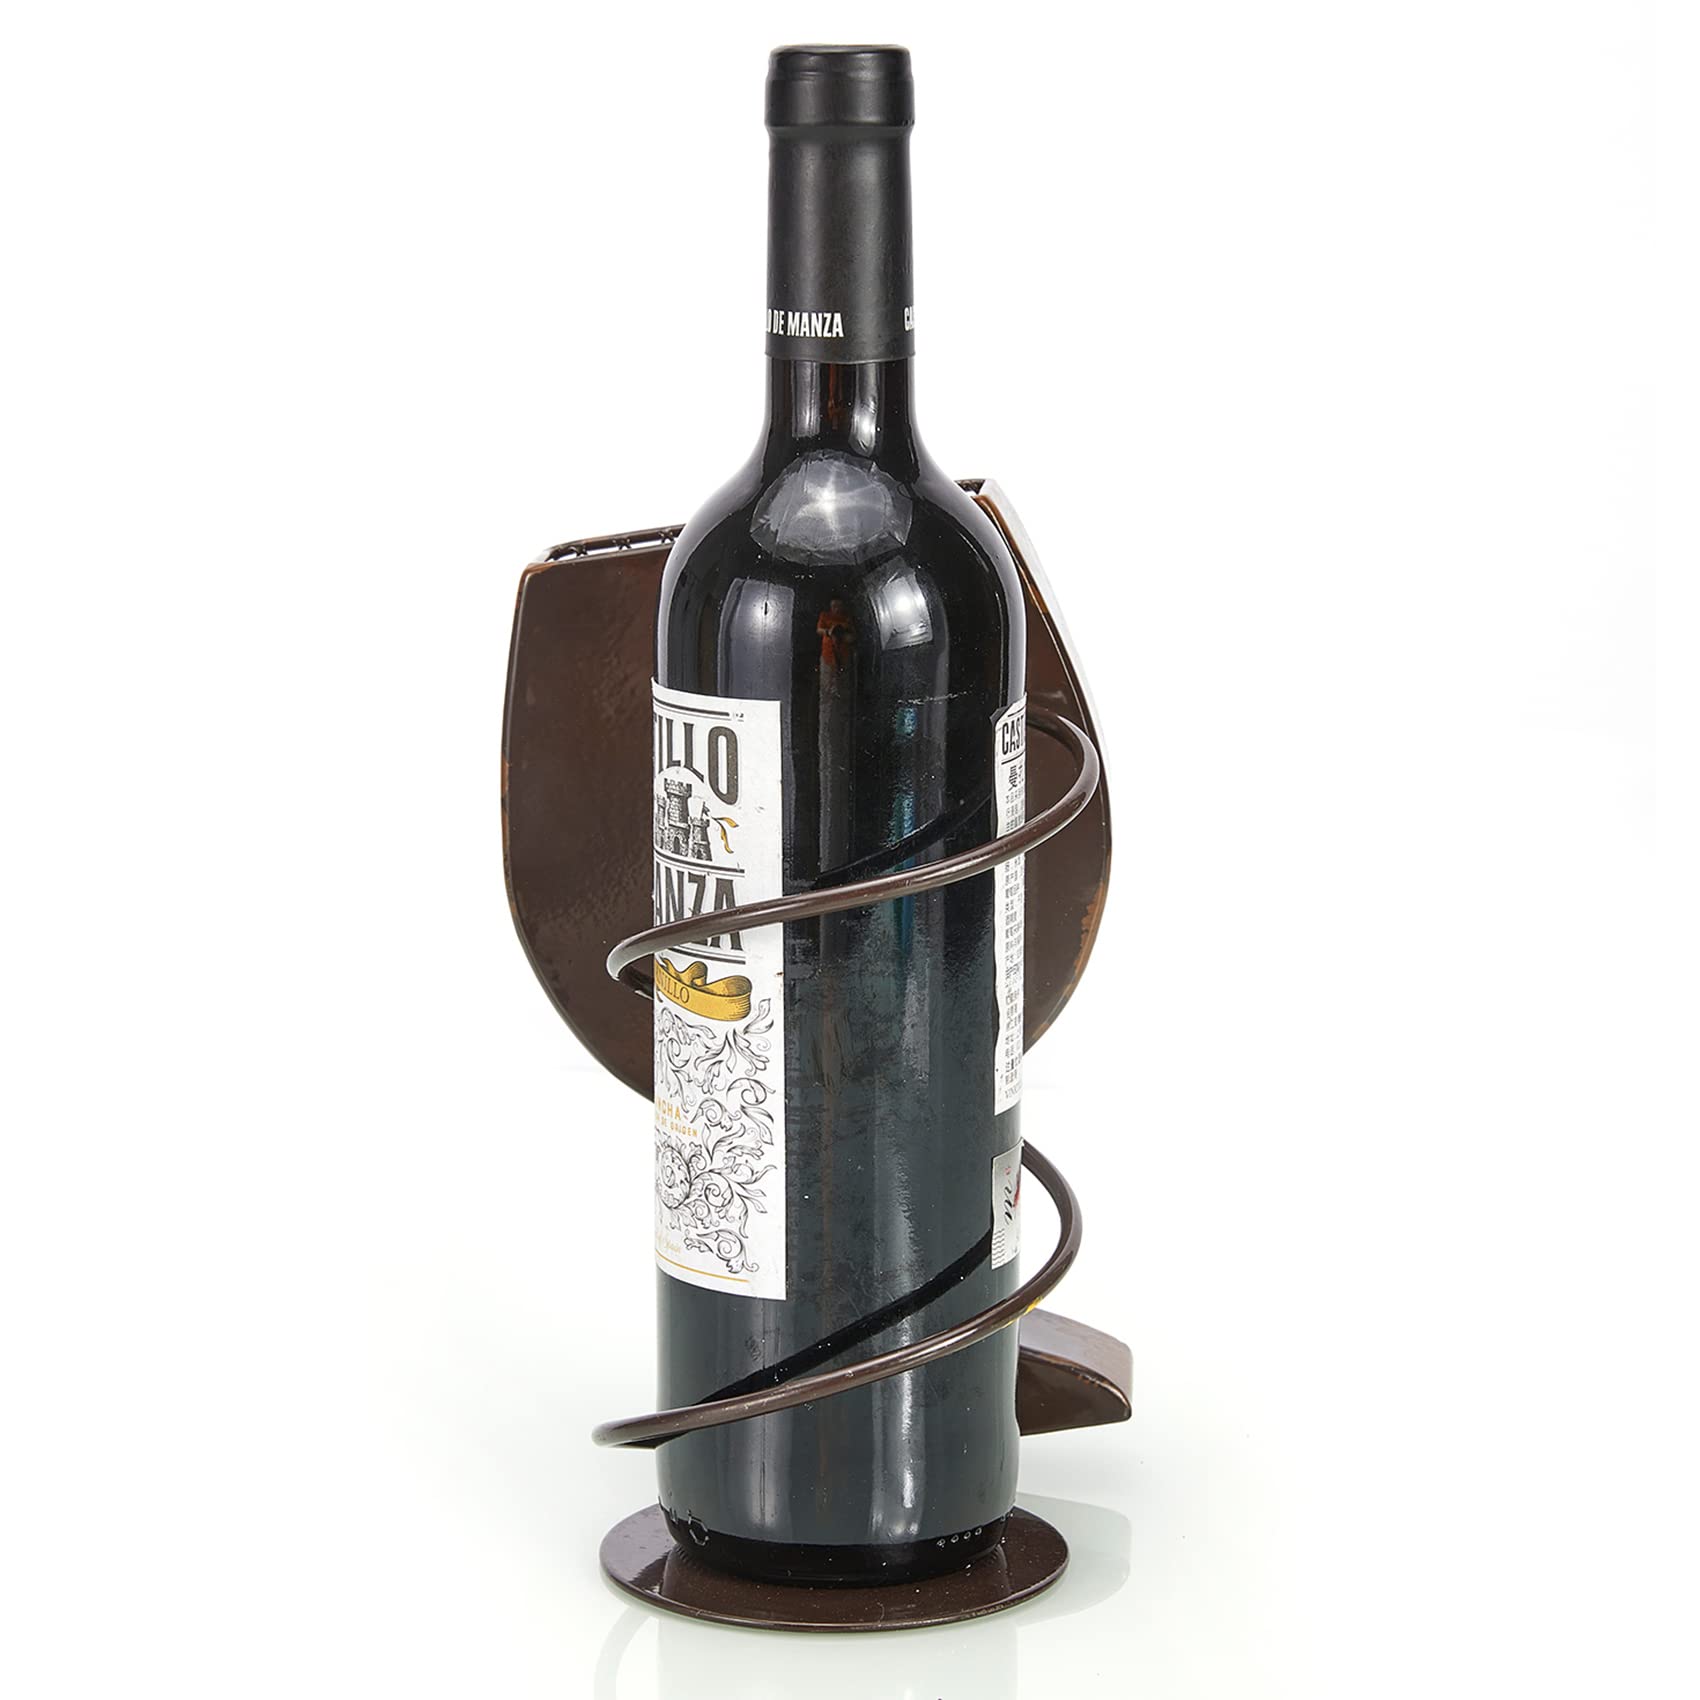 Yawill Wine Bottle Holder Wine Glass Statue Decorative Cork Holder Tabletop Wine Accessory for Home Kitchen (Wine Glass)